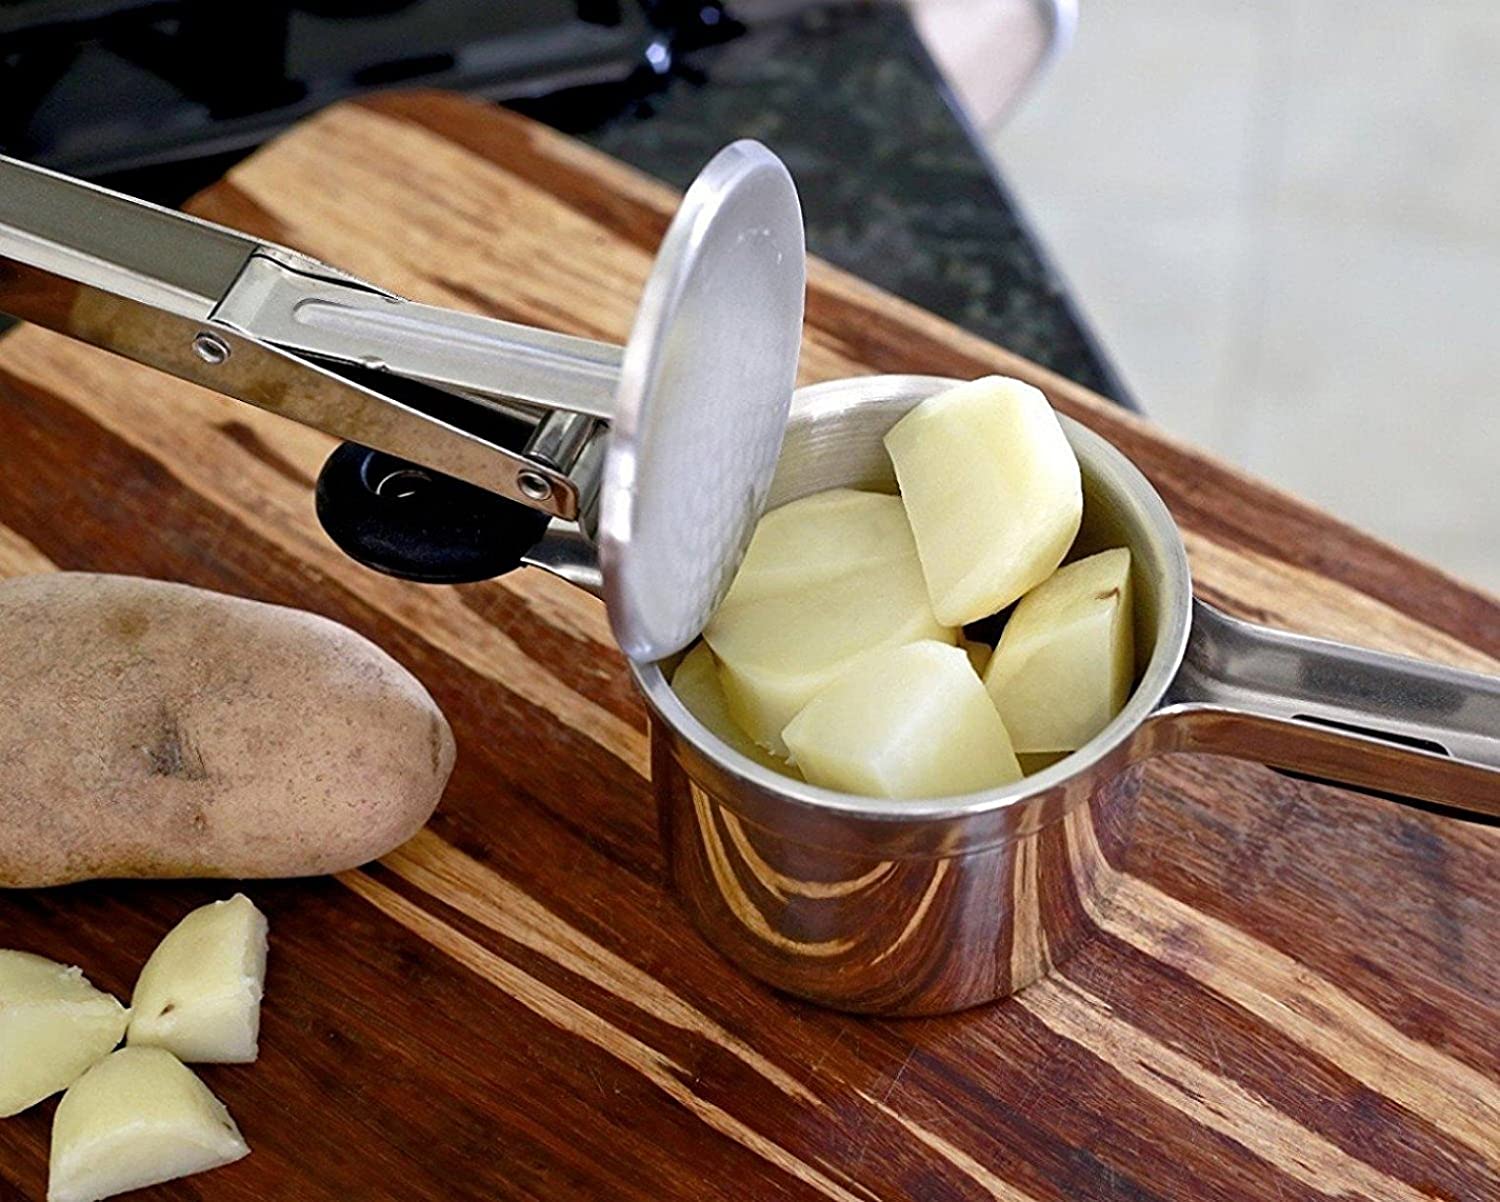 PriorityChef Potato Ricer - 1 Year Warranty Sign up